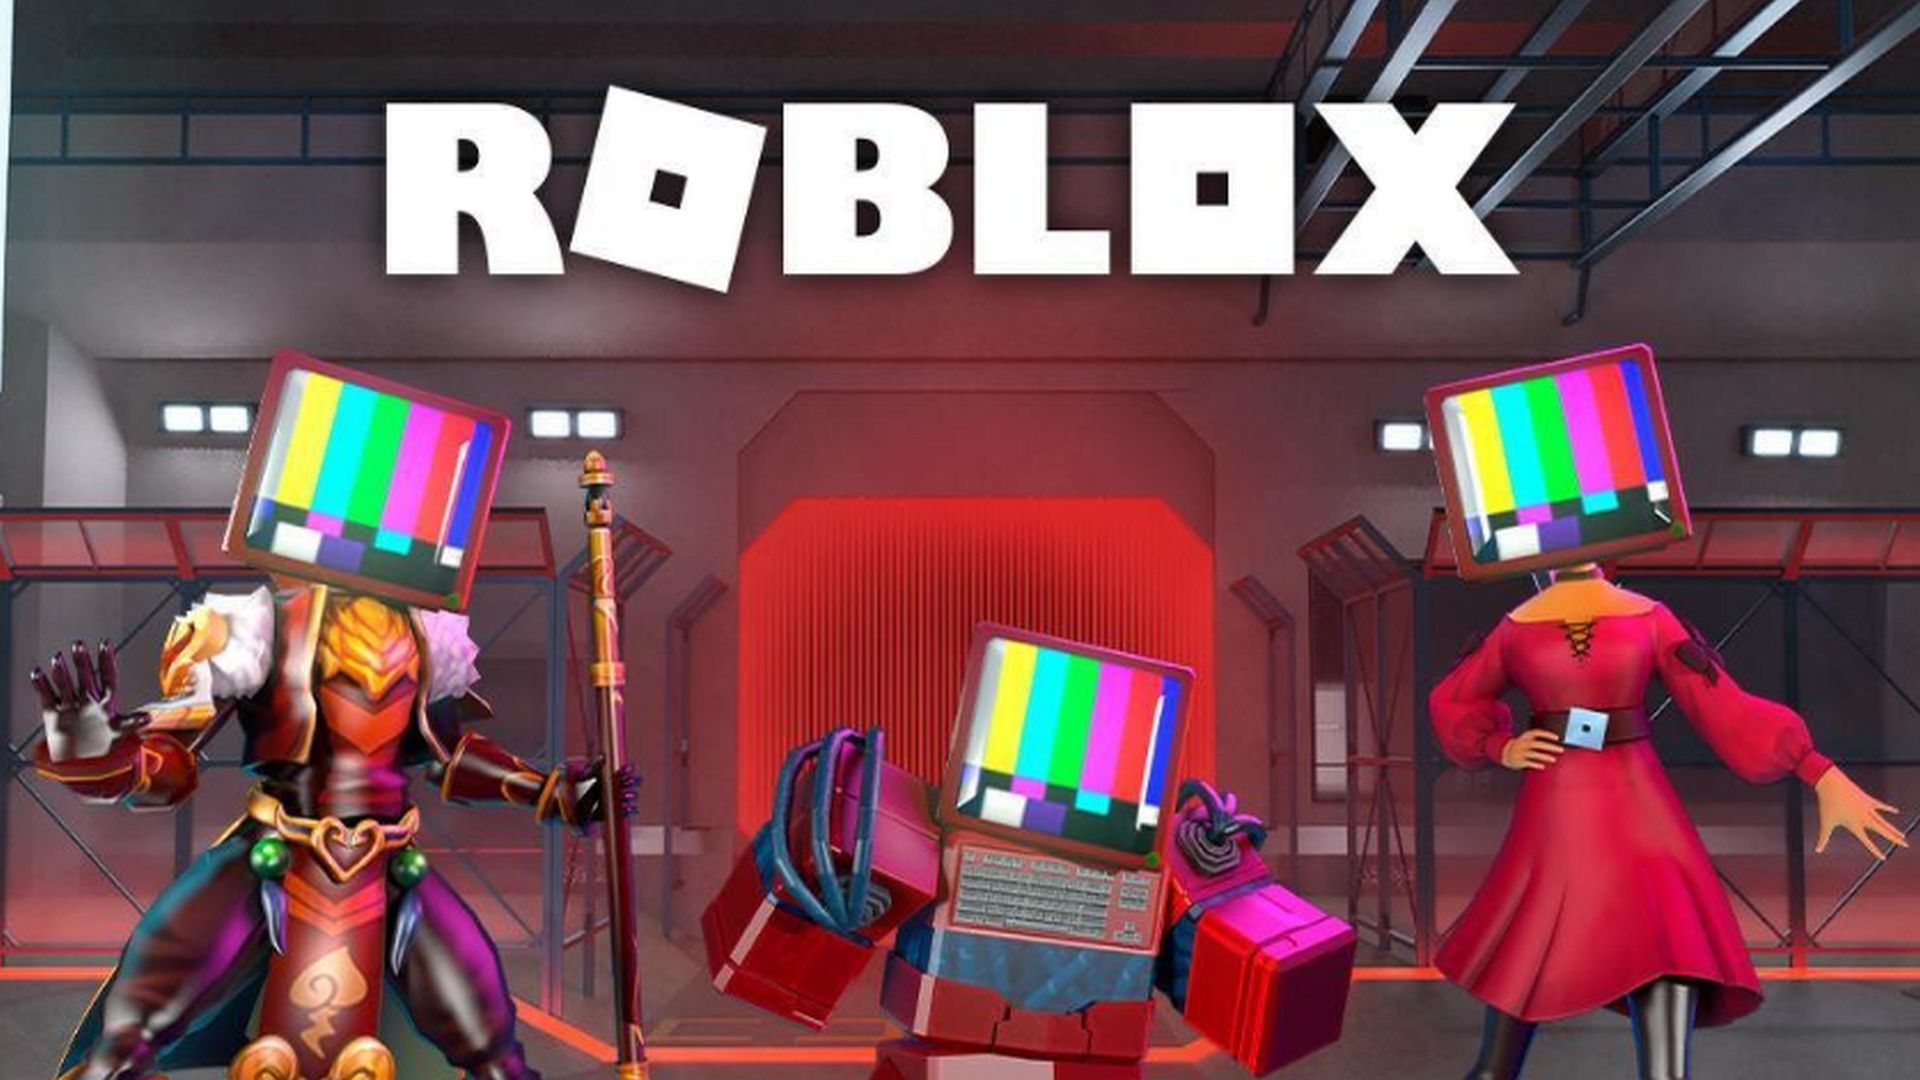 Roblox Gets Exclusive  Prime Gaming Content